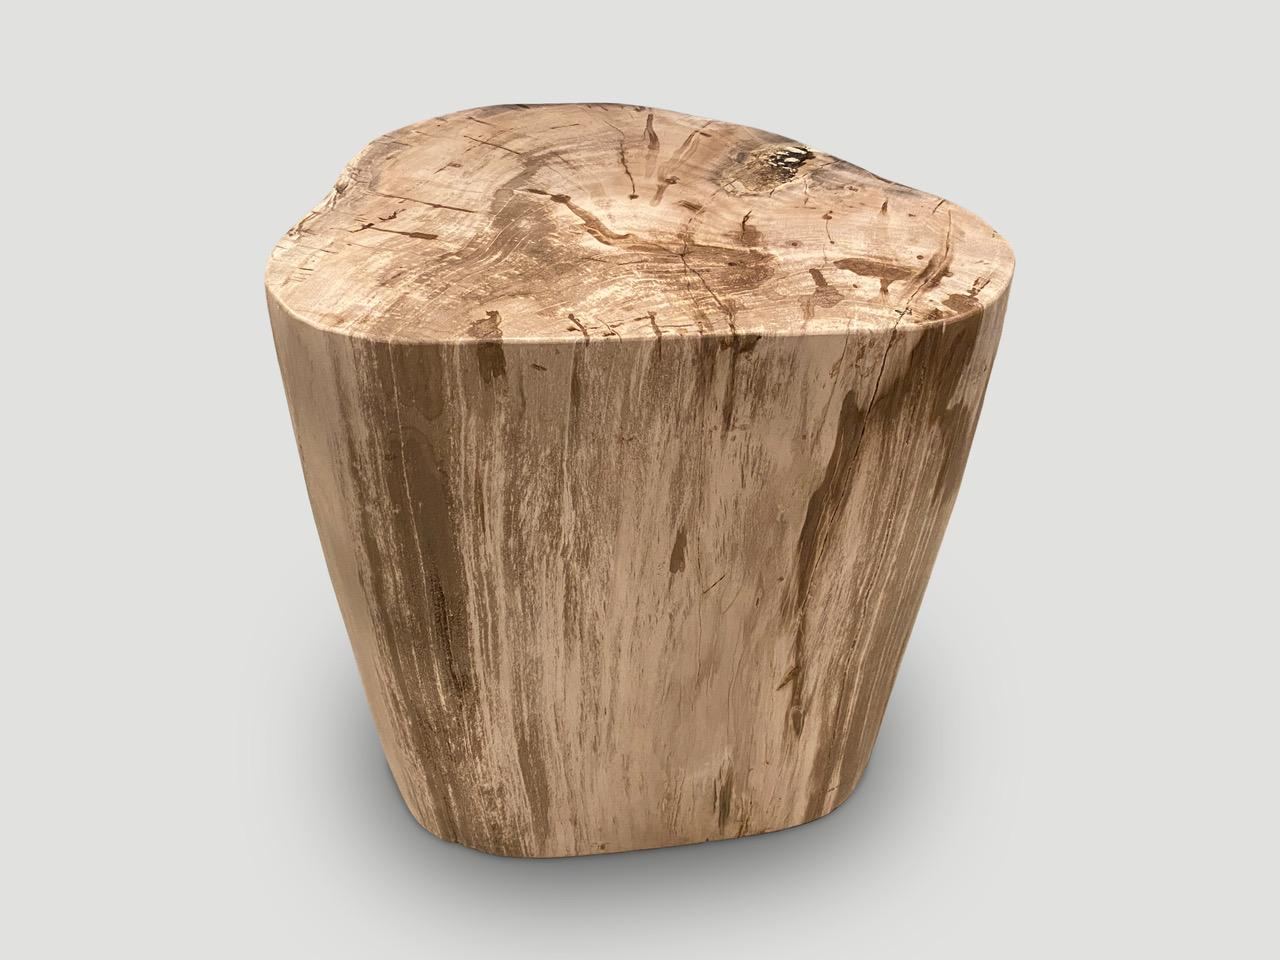 Beautiful tones and markings on this high quality petrified wood side table. It’s fascinating how Mother Nature produces these exquisite 40 million year old petrified teak logs with such contrasting colors and natural patterns throughout. Modern yet